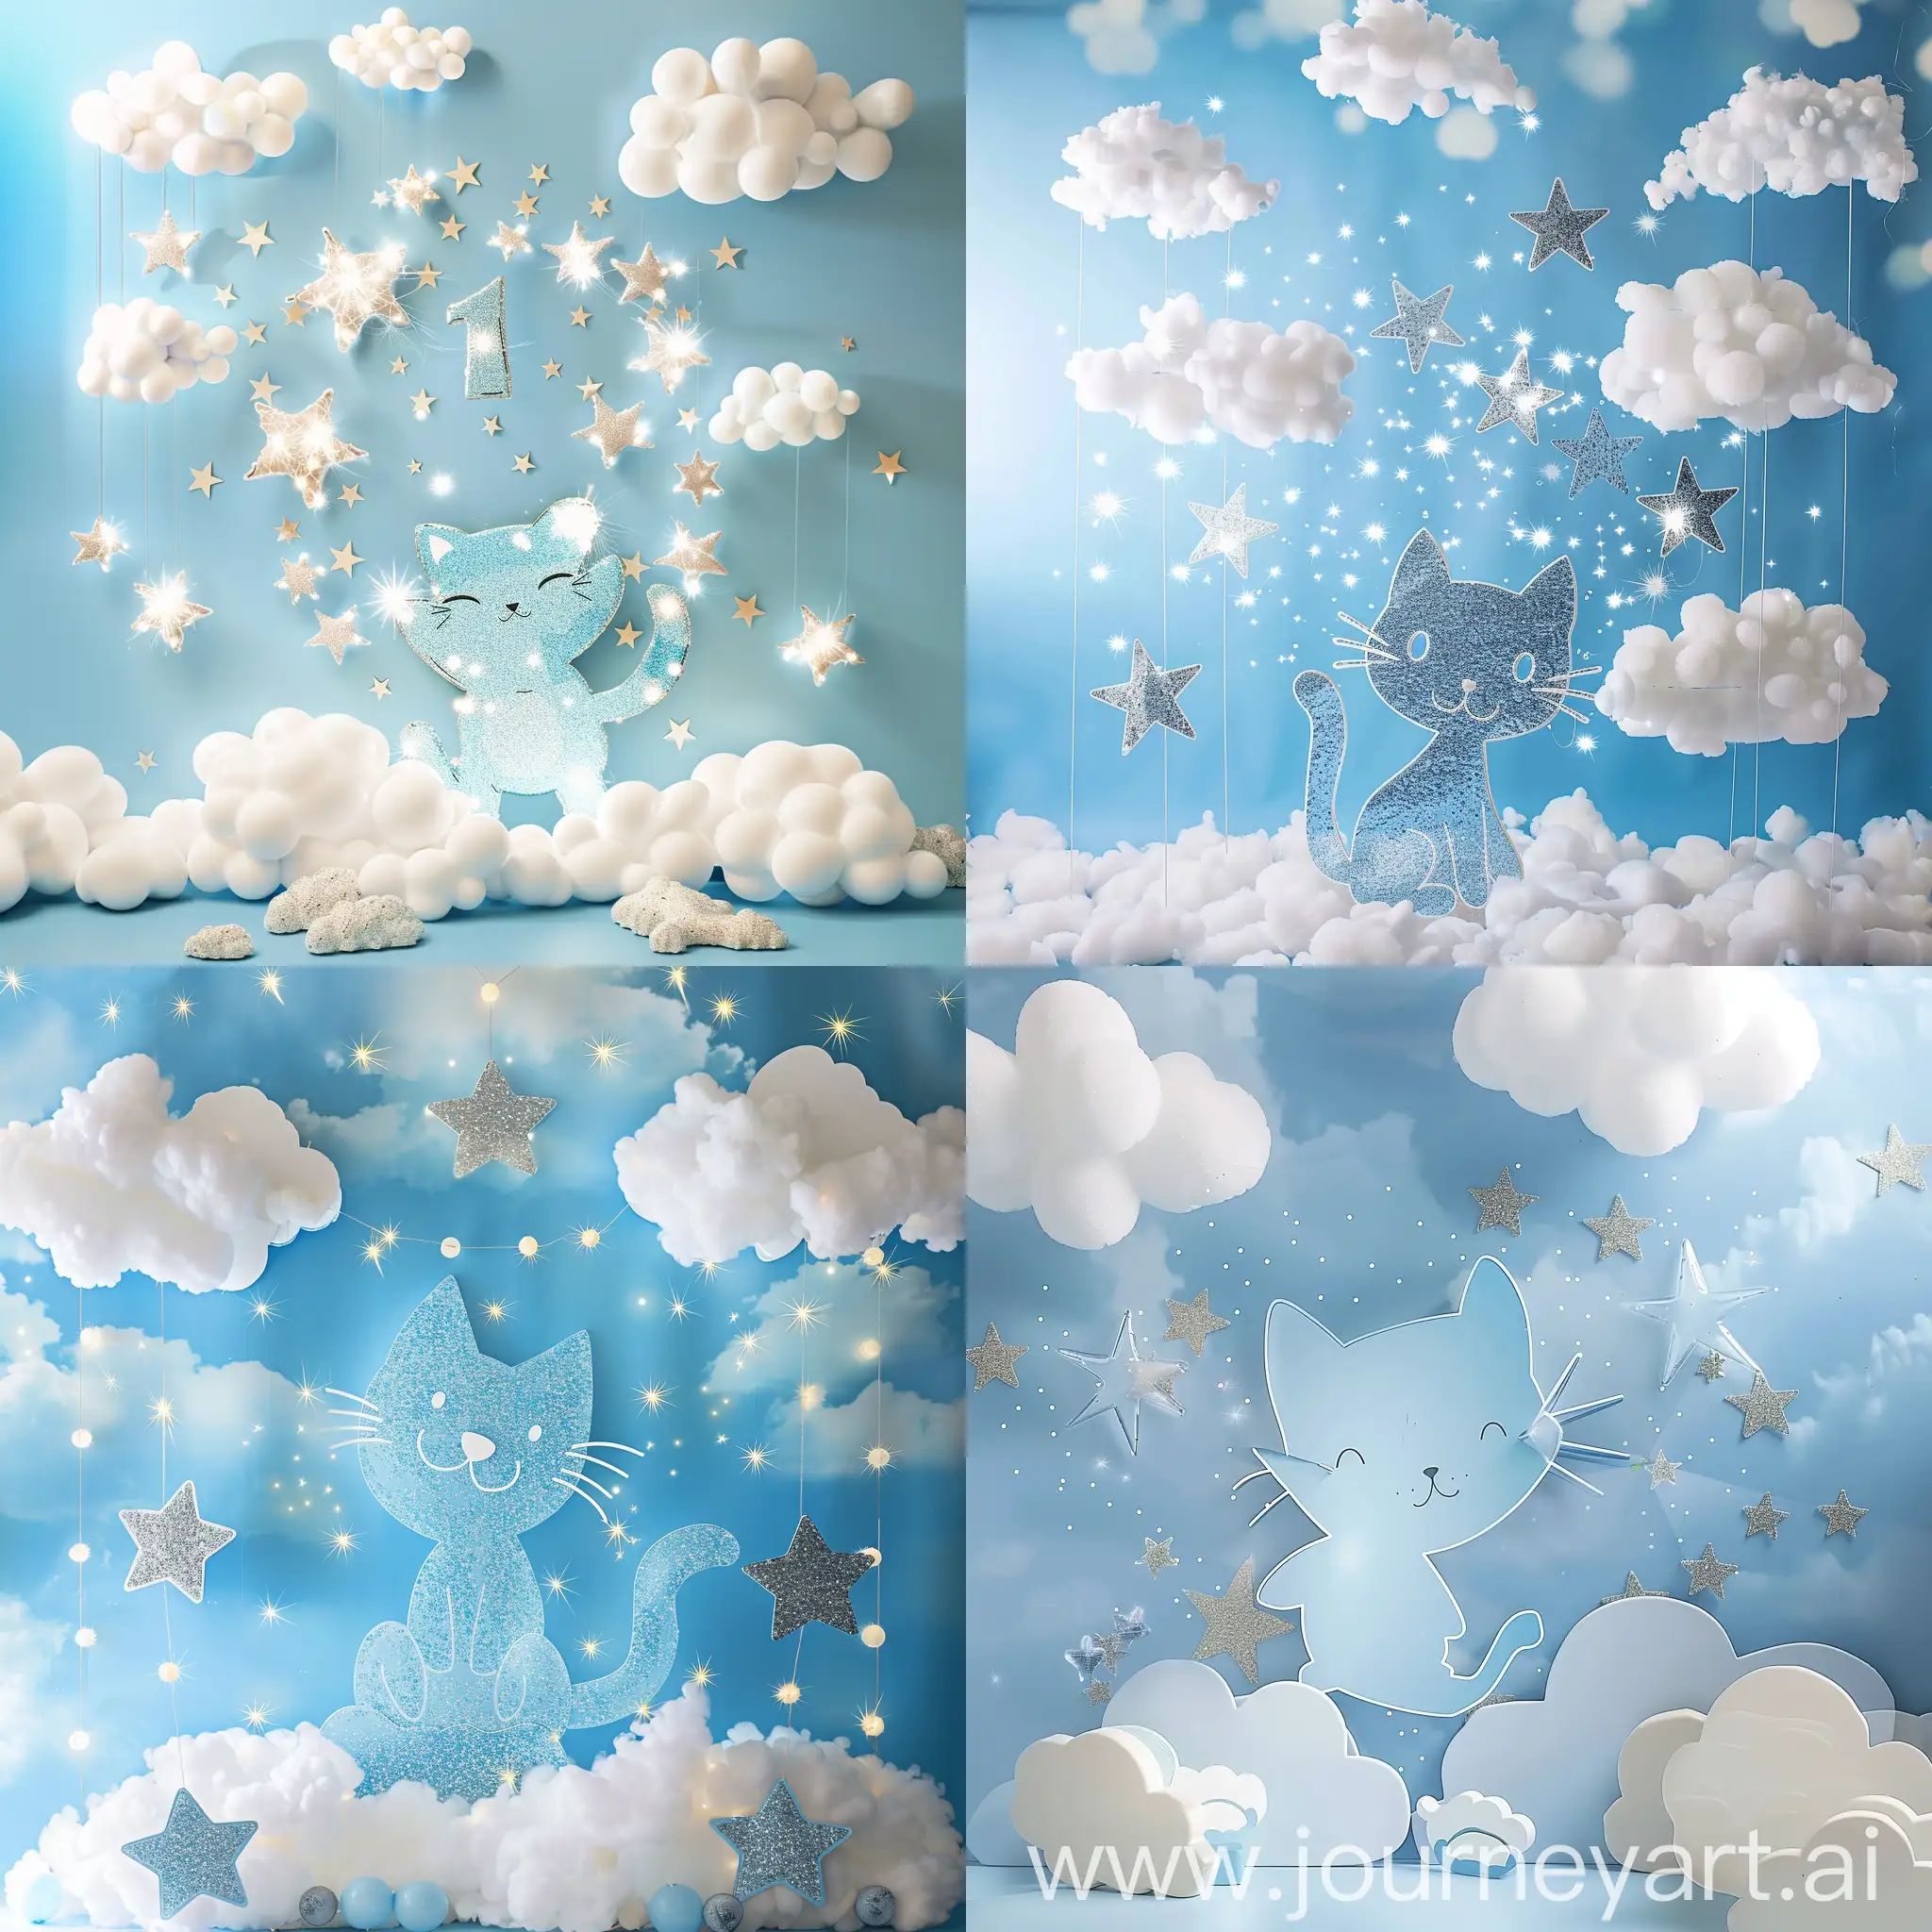 1 year old boy's birthday backdrop, blue mixed with white, light and bright tones, clouds, sparkling stars in the shape of a cute cartoon cat